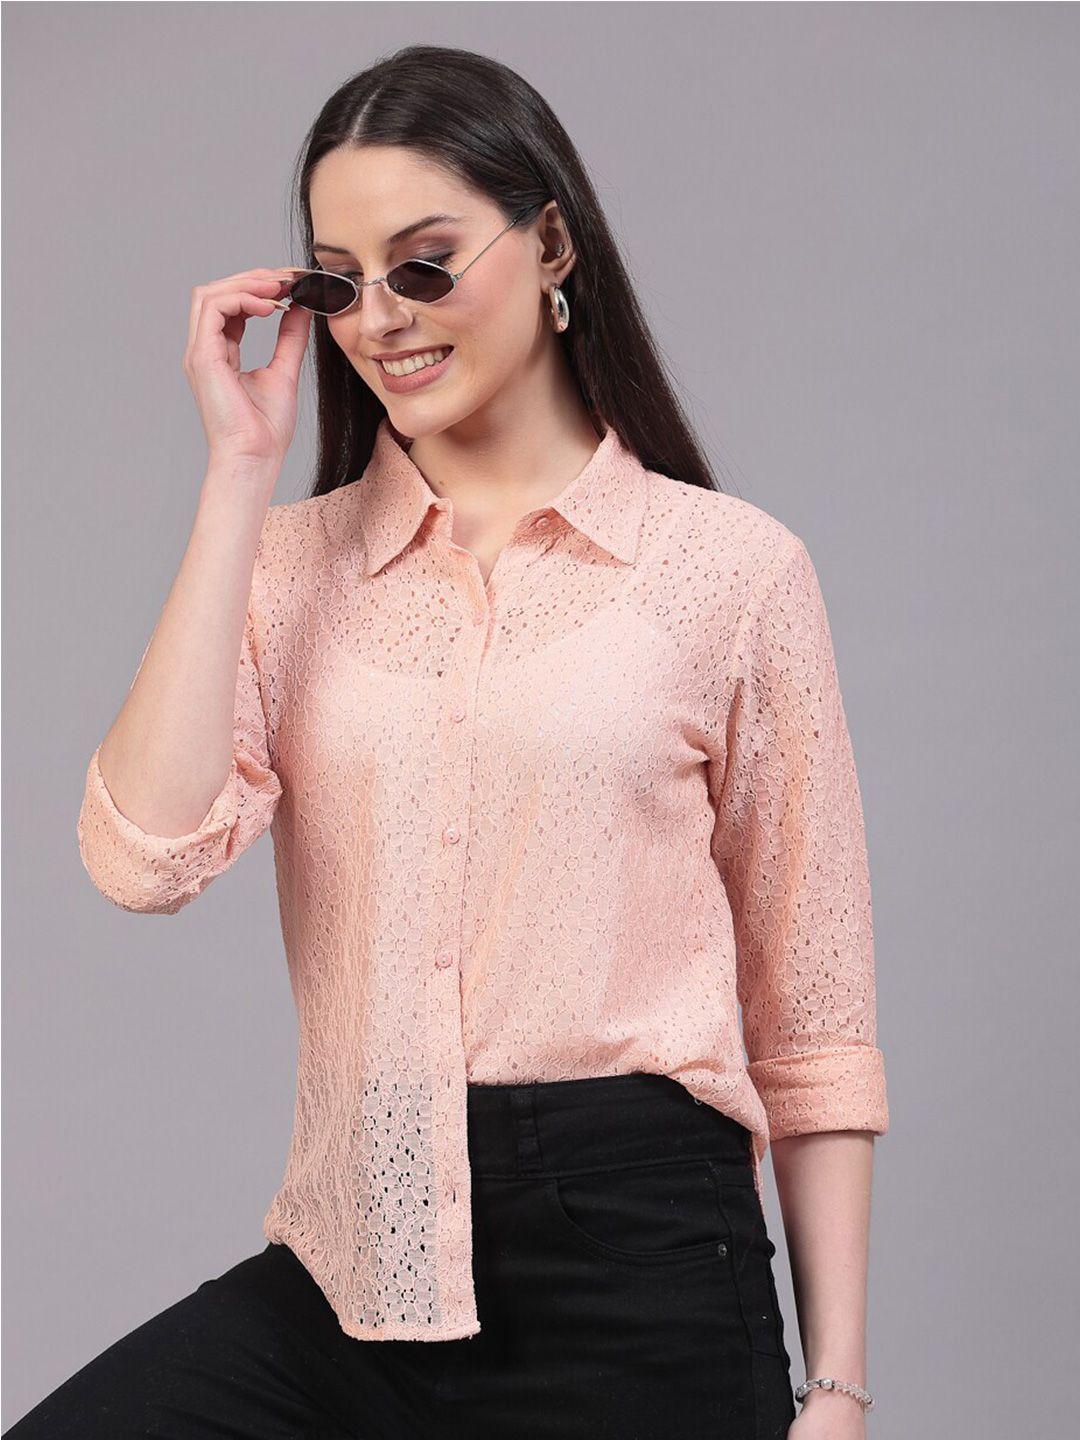 style-quotient-women-classic-sheer-casual-shirt